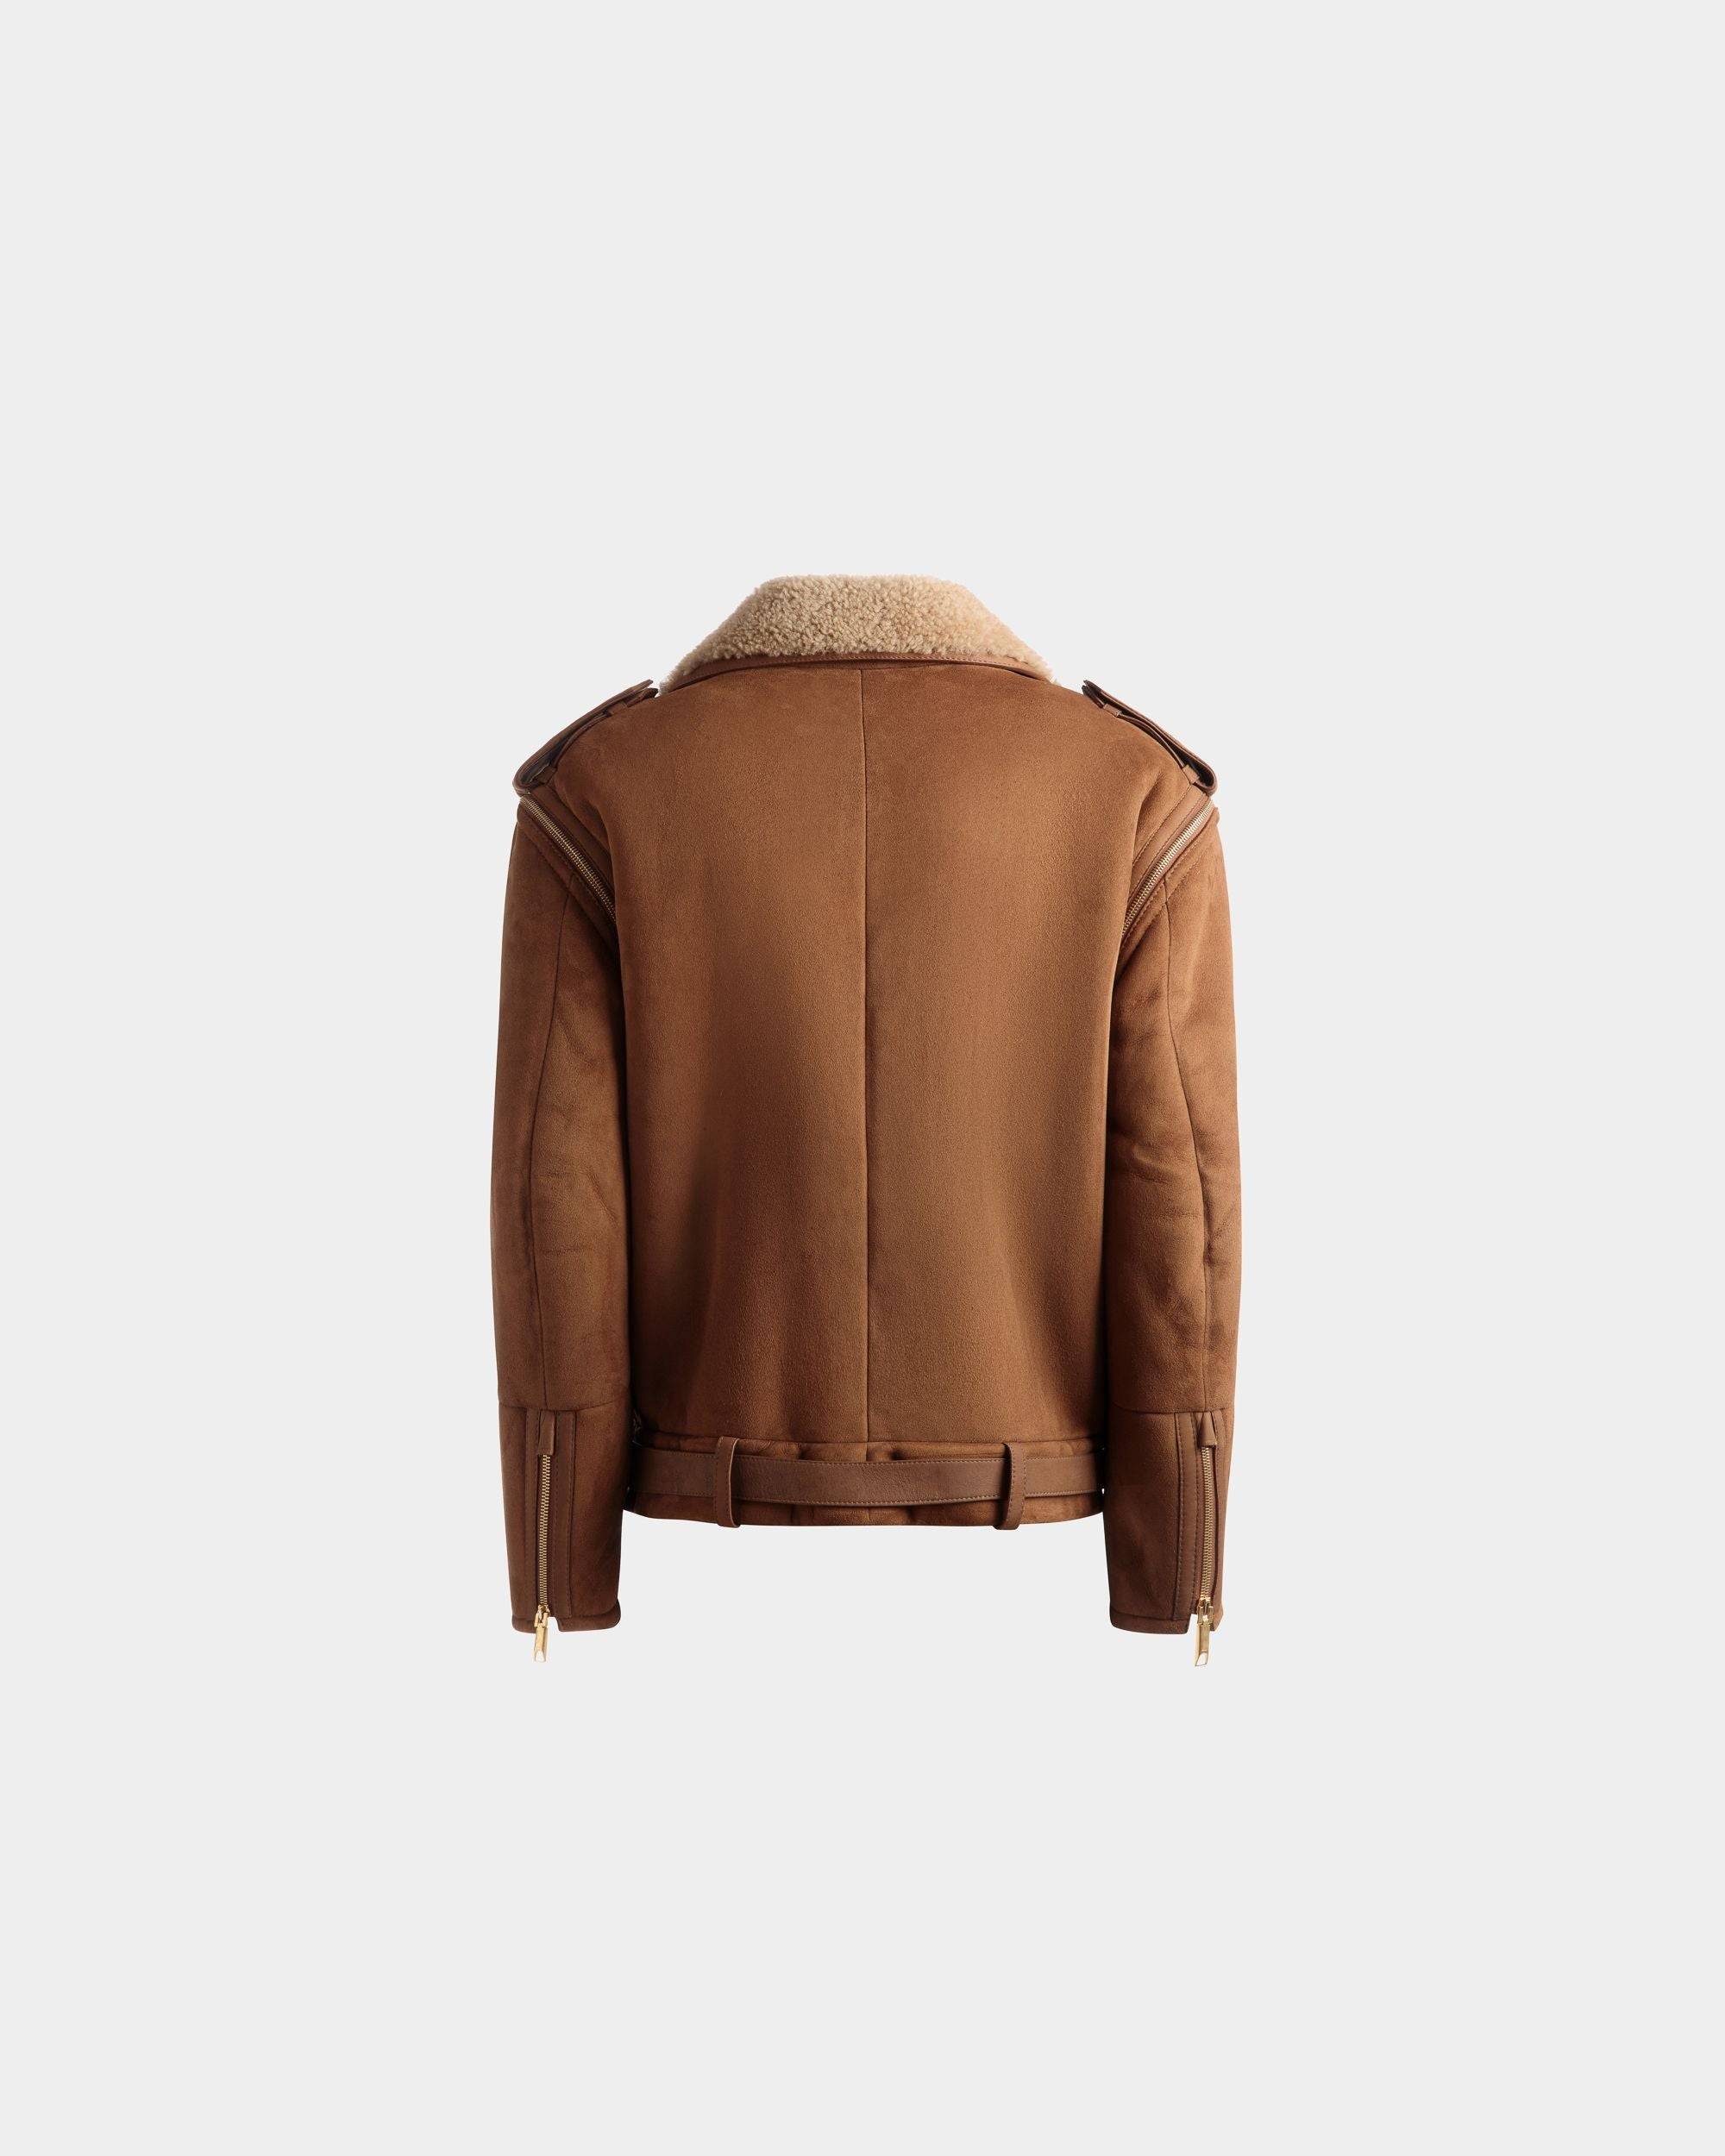 Double Breasted Shearling Jacket | Women's Outerwear | Brown Suede | Bally | Still Life Back